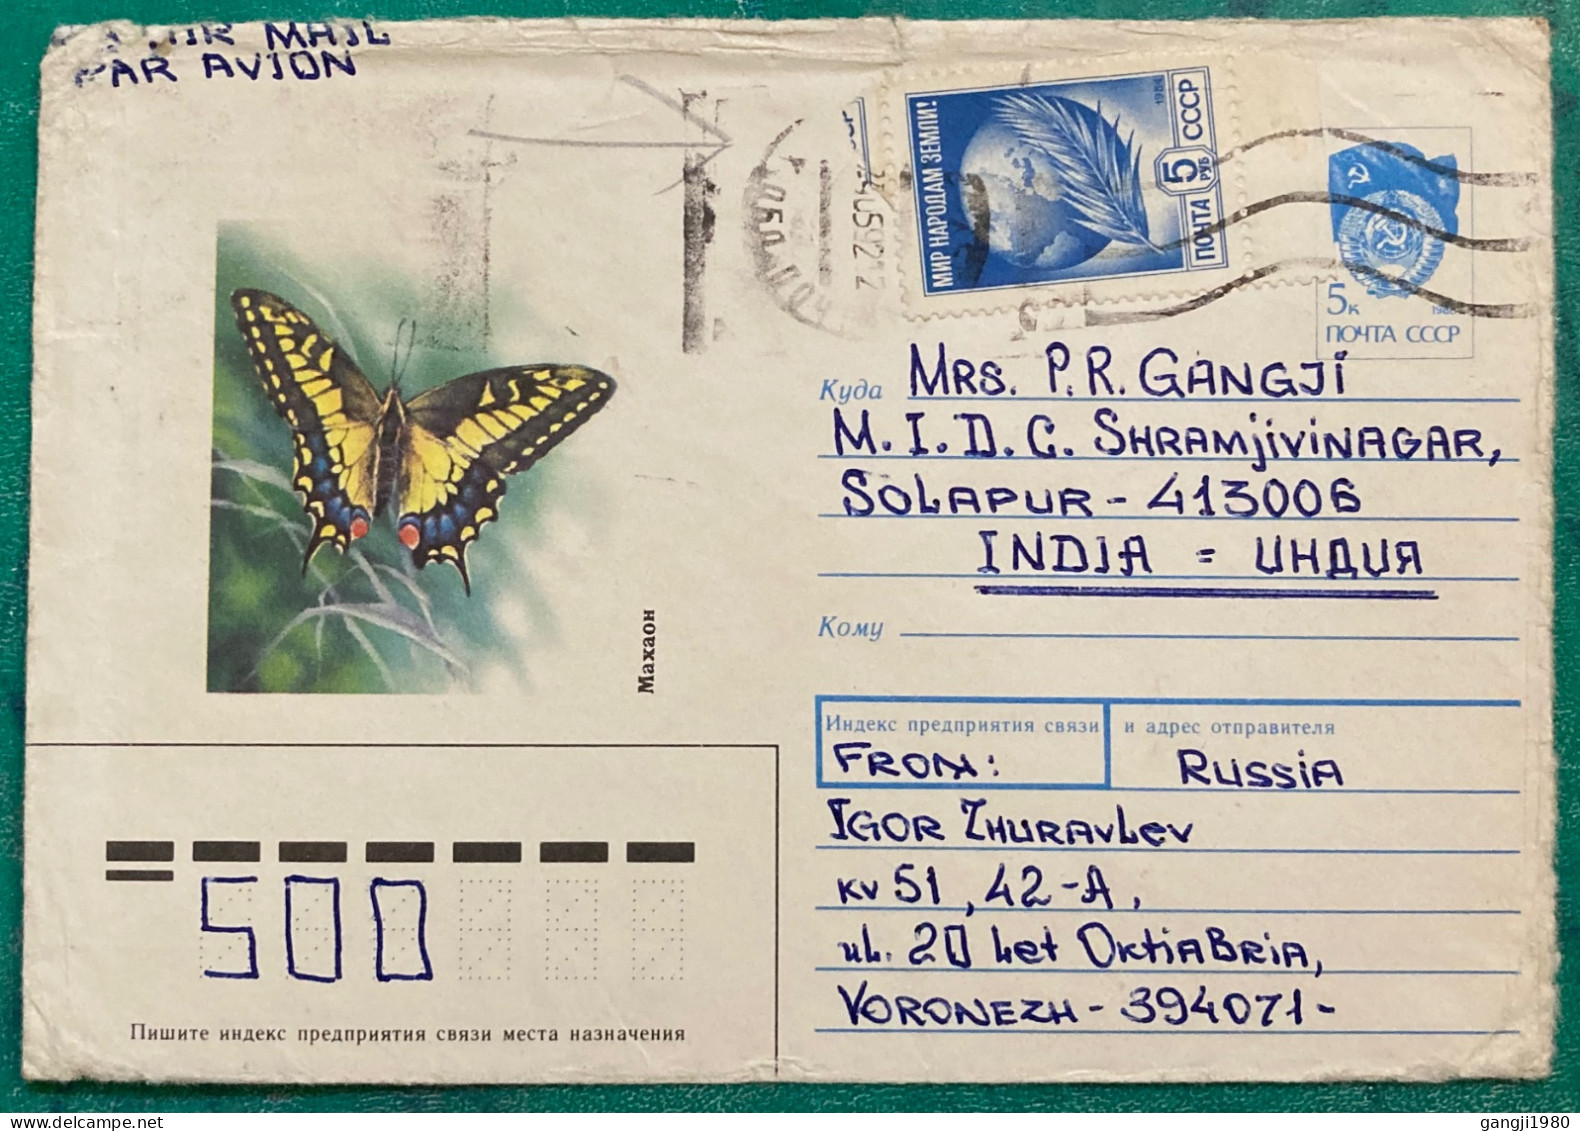 RUSSIA TO INDIA COVER USED 1992, STATIONERY COVER, ILLUSTRATE, BUTTERFLY,  GLOBE & FEATHER, COAT OF ARM FLAG, KORONEZ CI - Cartas & Documentos